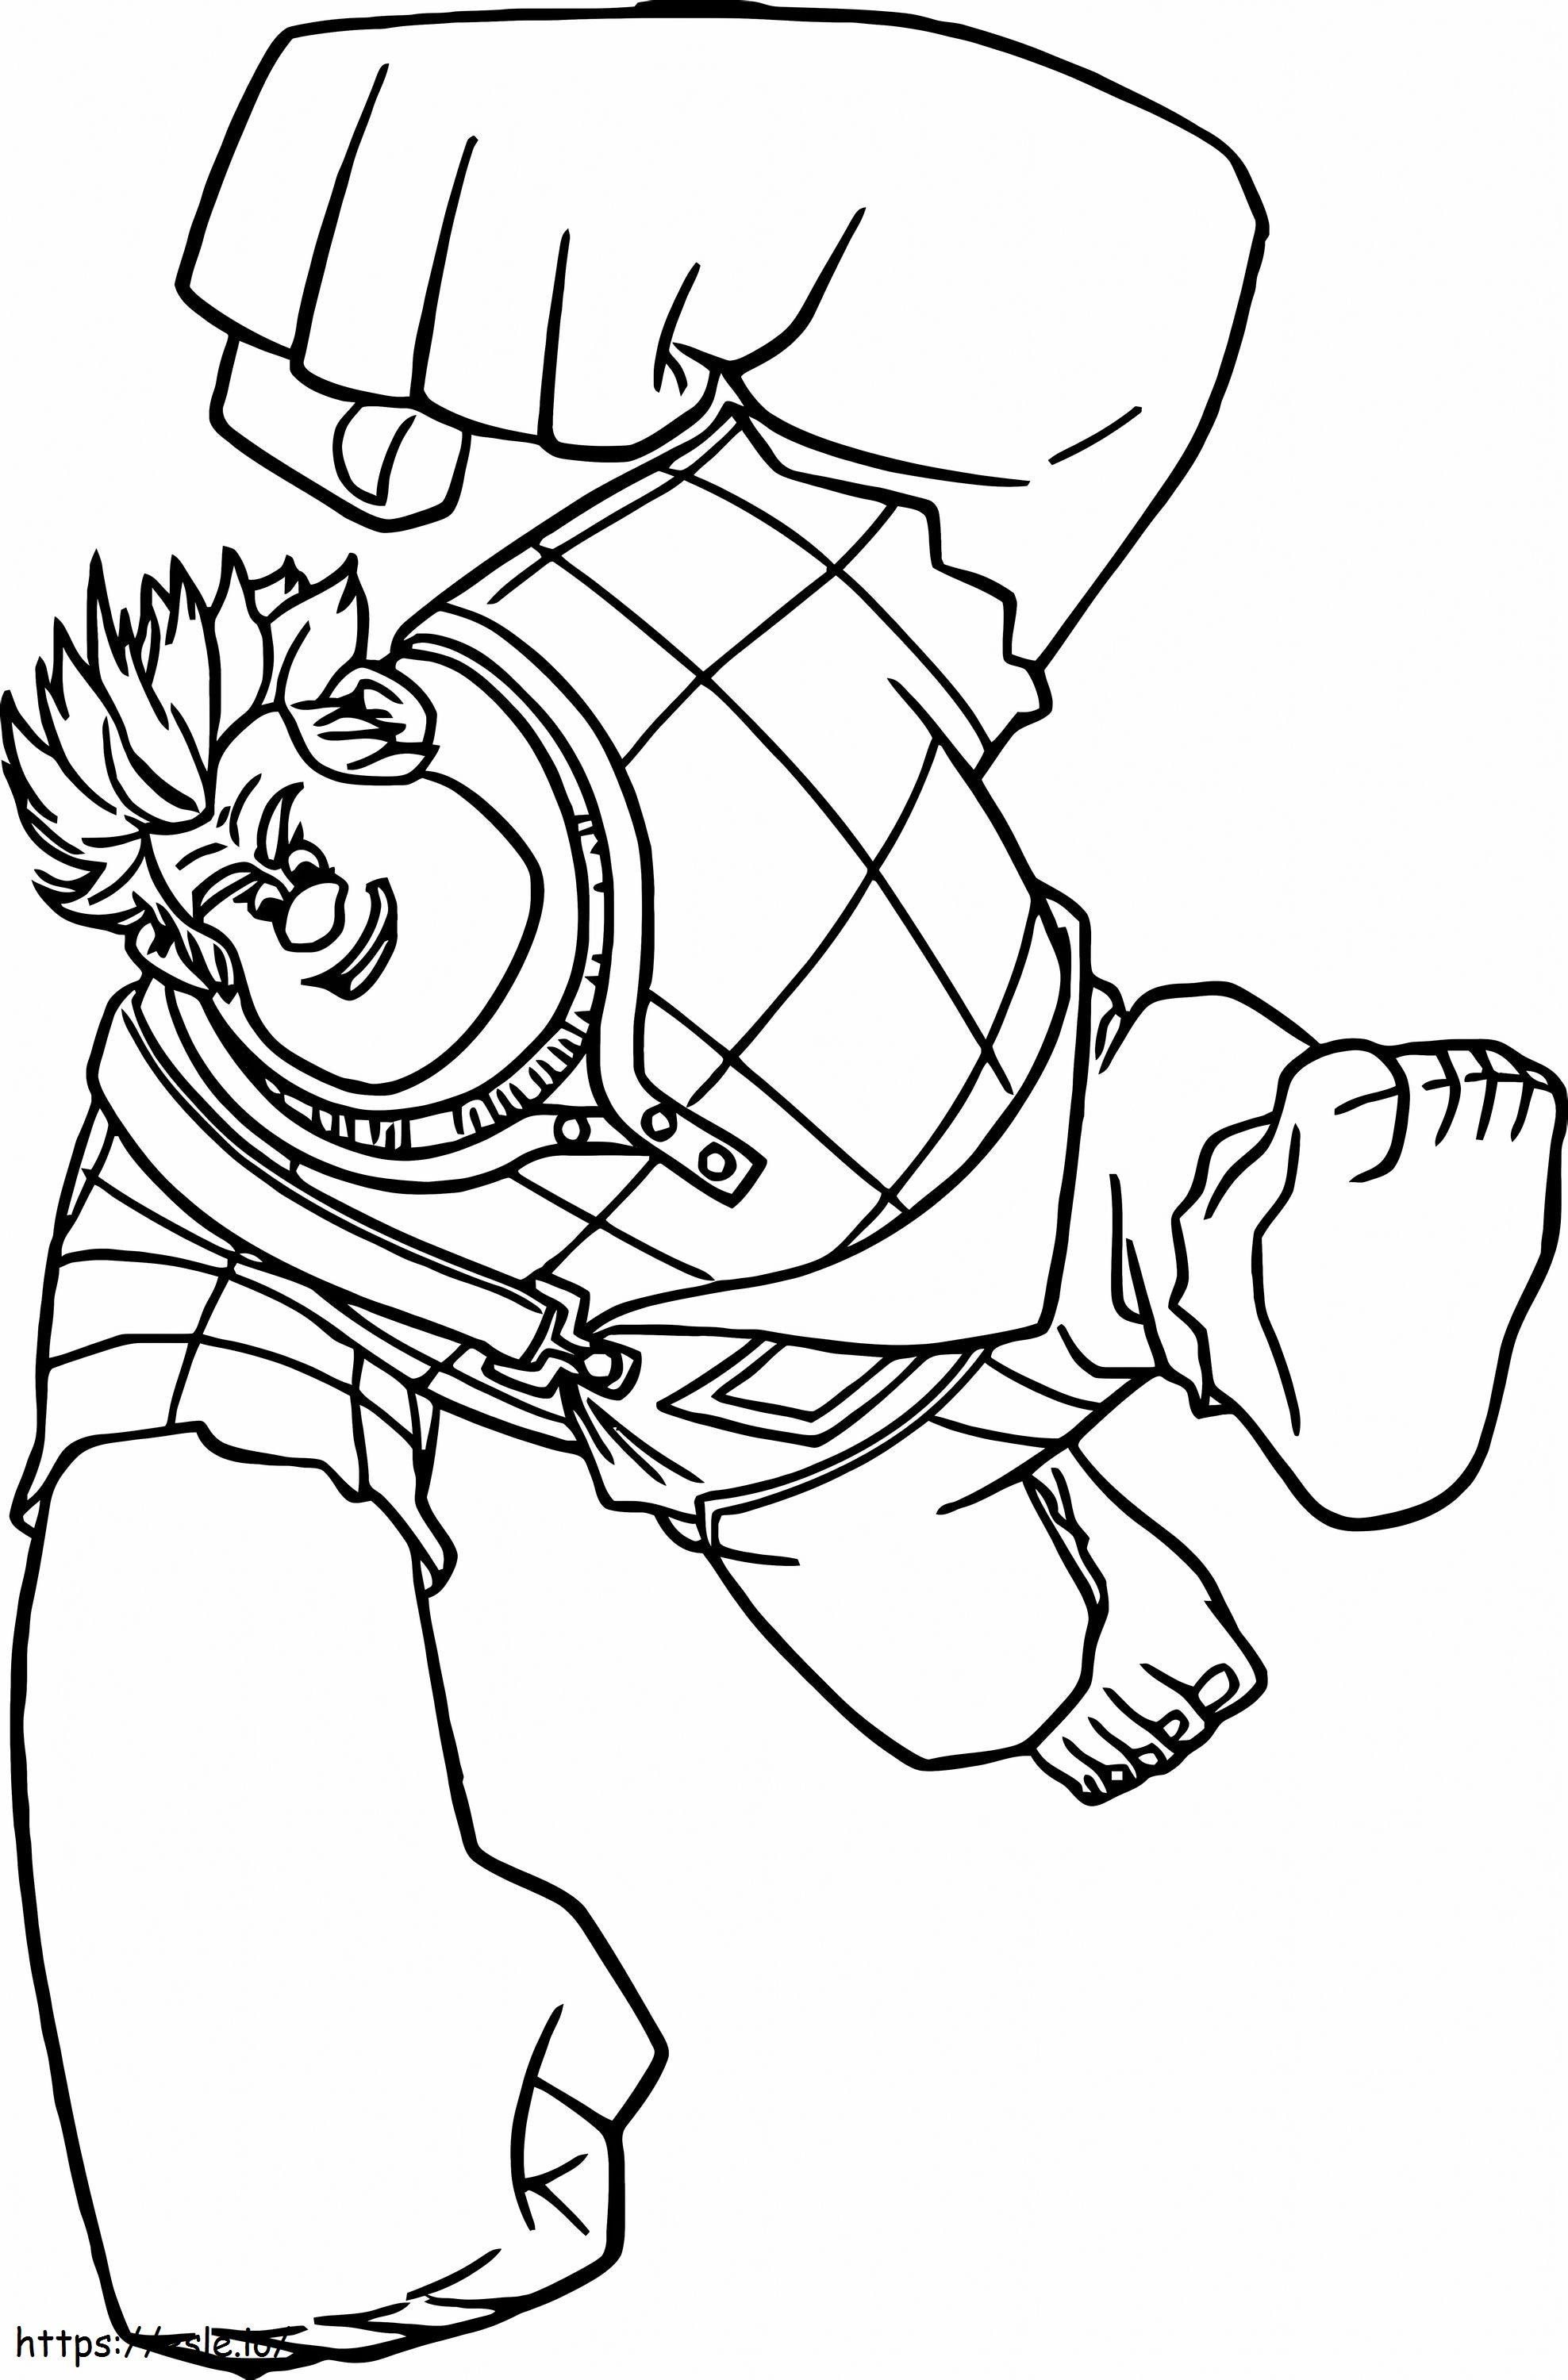 1539745758 Wreck It Ralph Best Wreck It Ralph R Wreck It Ralph A Of Wreck It Ralph coloring page